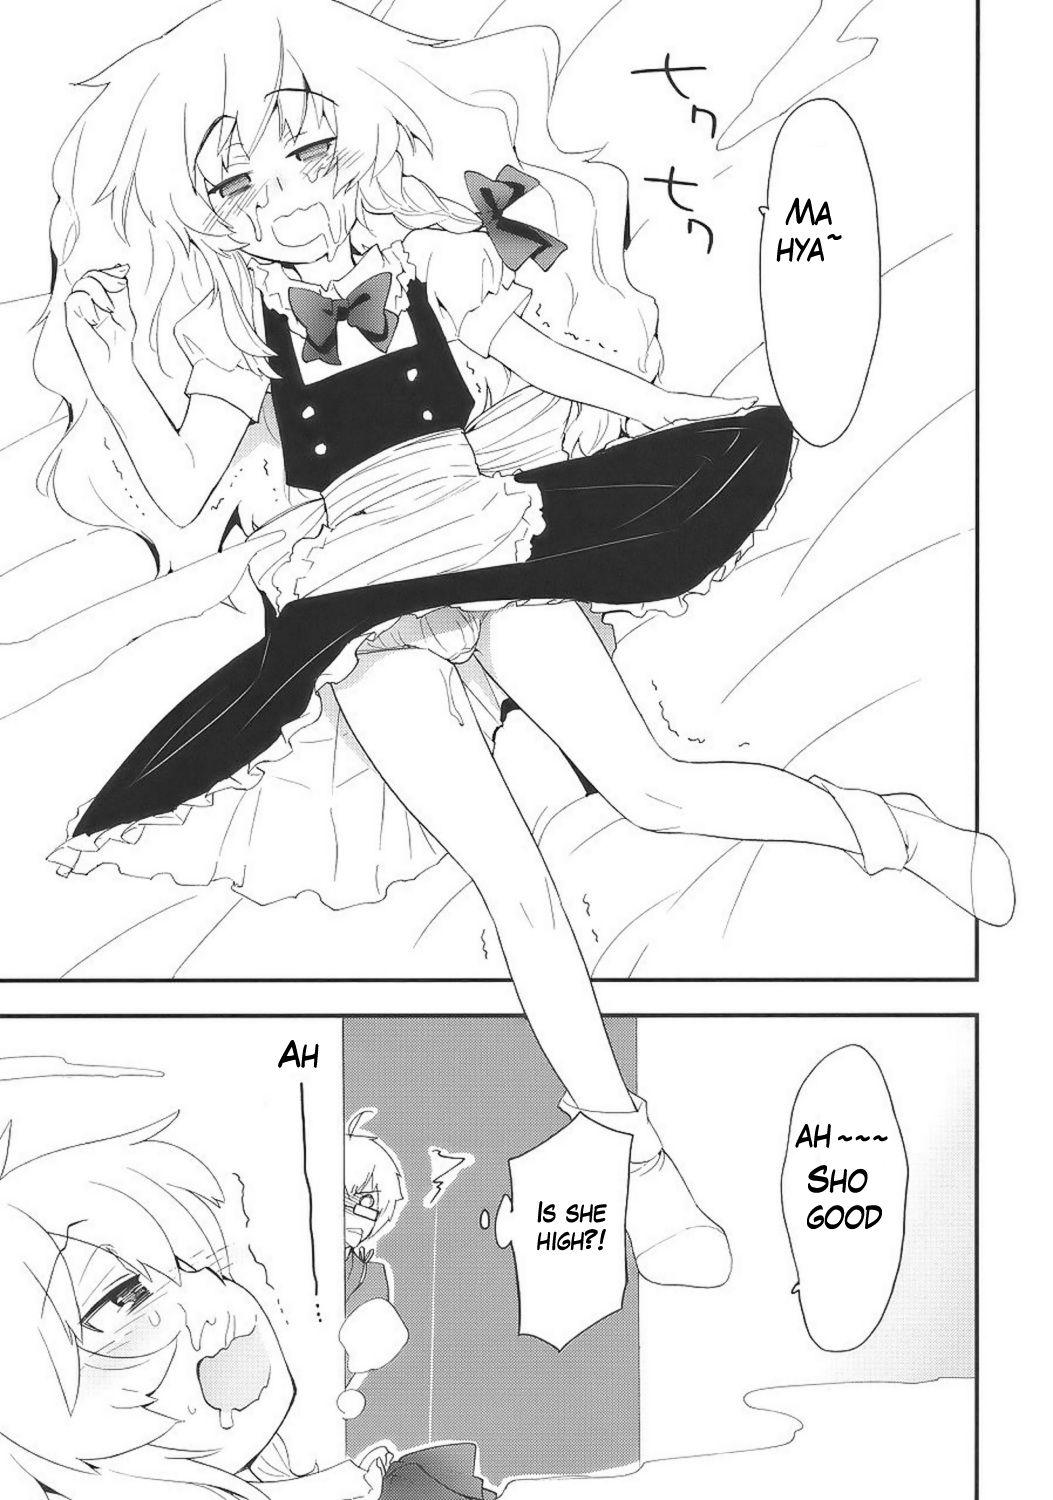 Hot Fuck Marisa to Kinoko to FLY HIGH | Marisa & Mushrooms & FLY HIGH - Touhou project Sola - Page 10